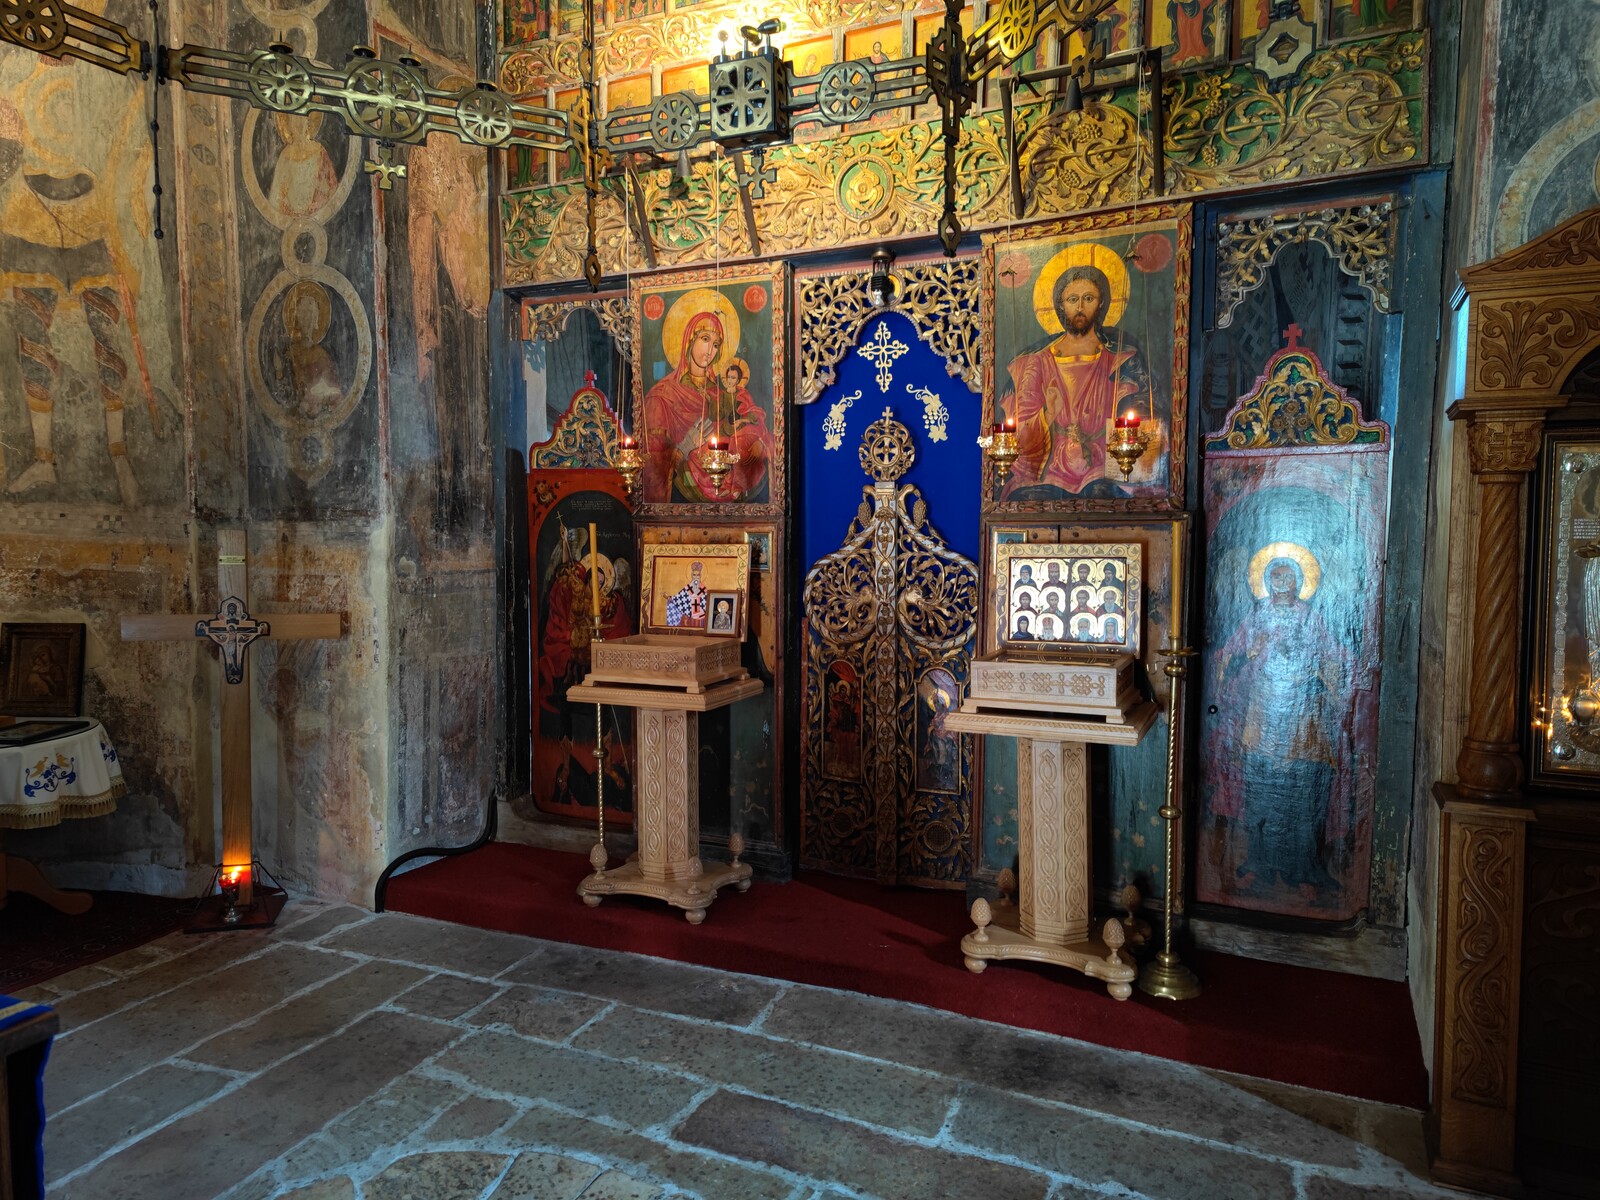 View of the Icon Screen and Relics of Saints